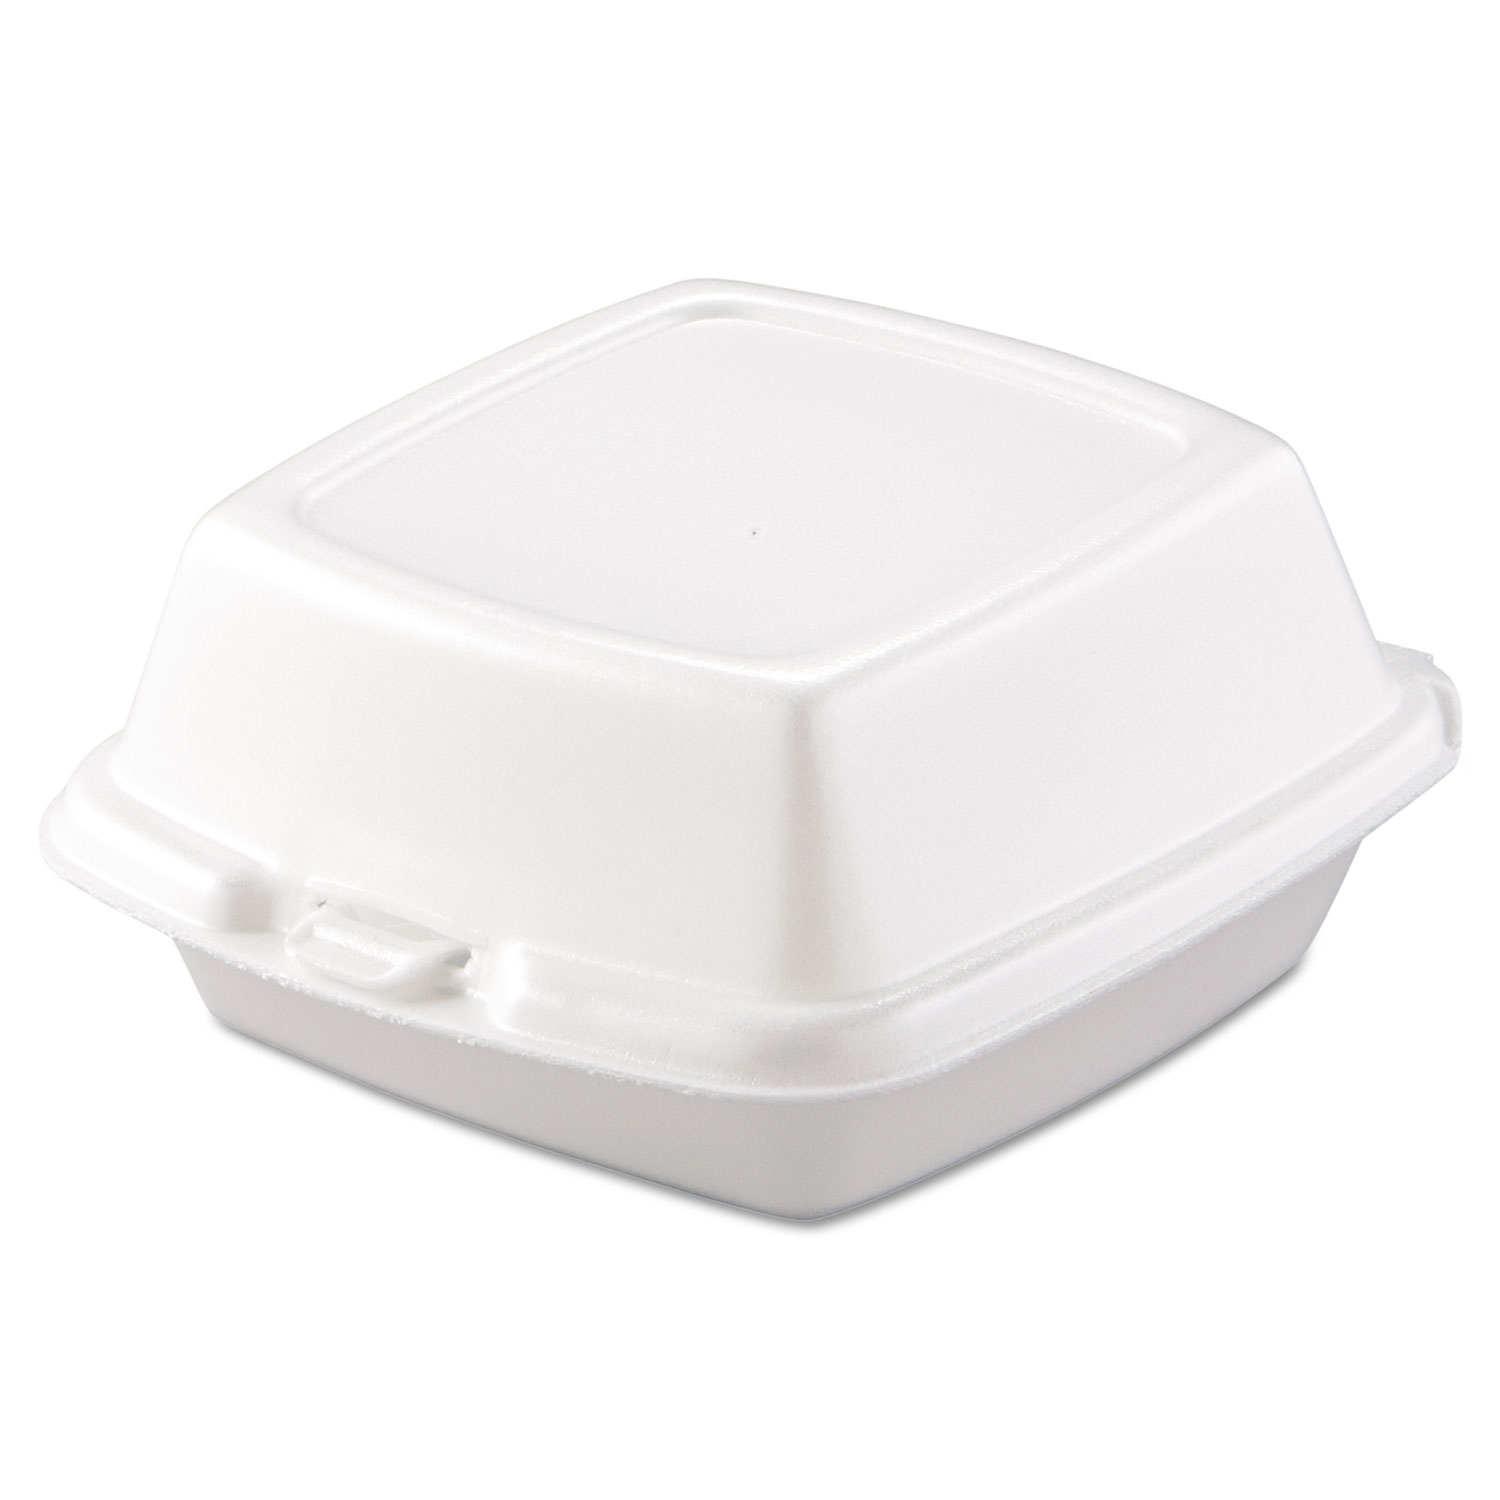  Dart 60HT1 Carryout Food Containers, Foam, 1-Comp, 5 7/8 x 6 x 3, White, 500/Carton (DCC60HT1) 